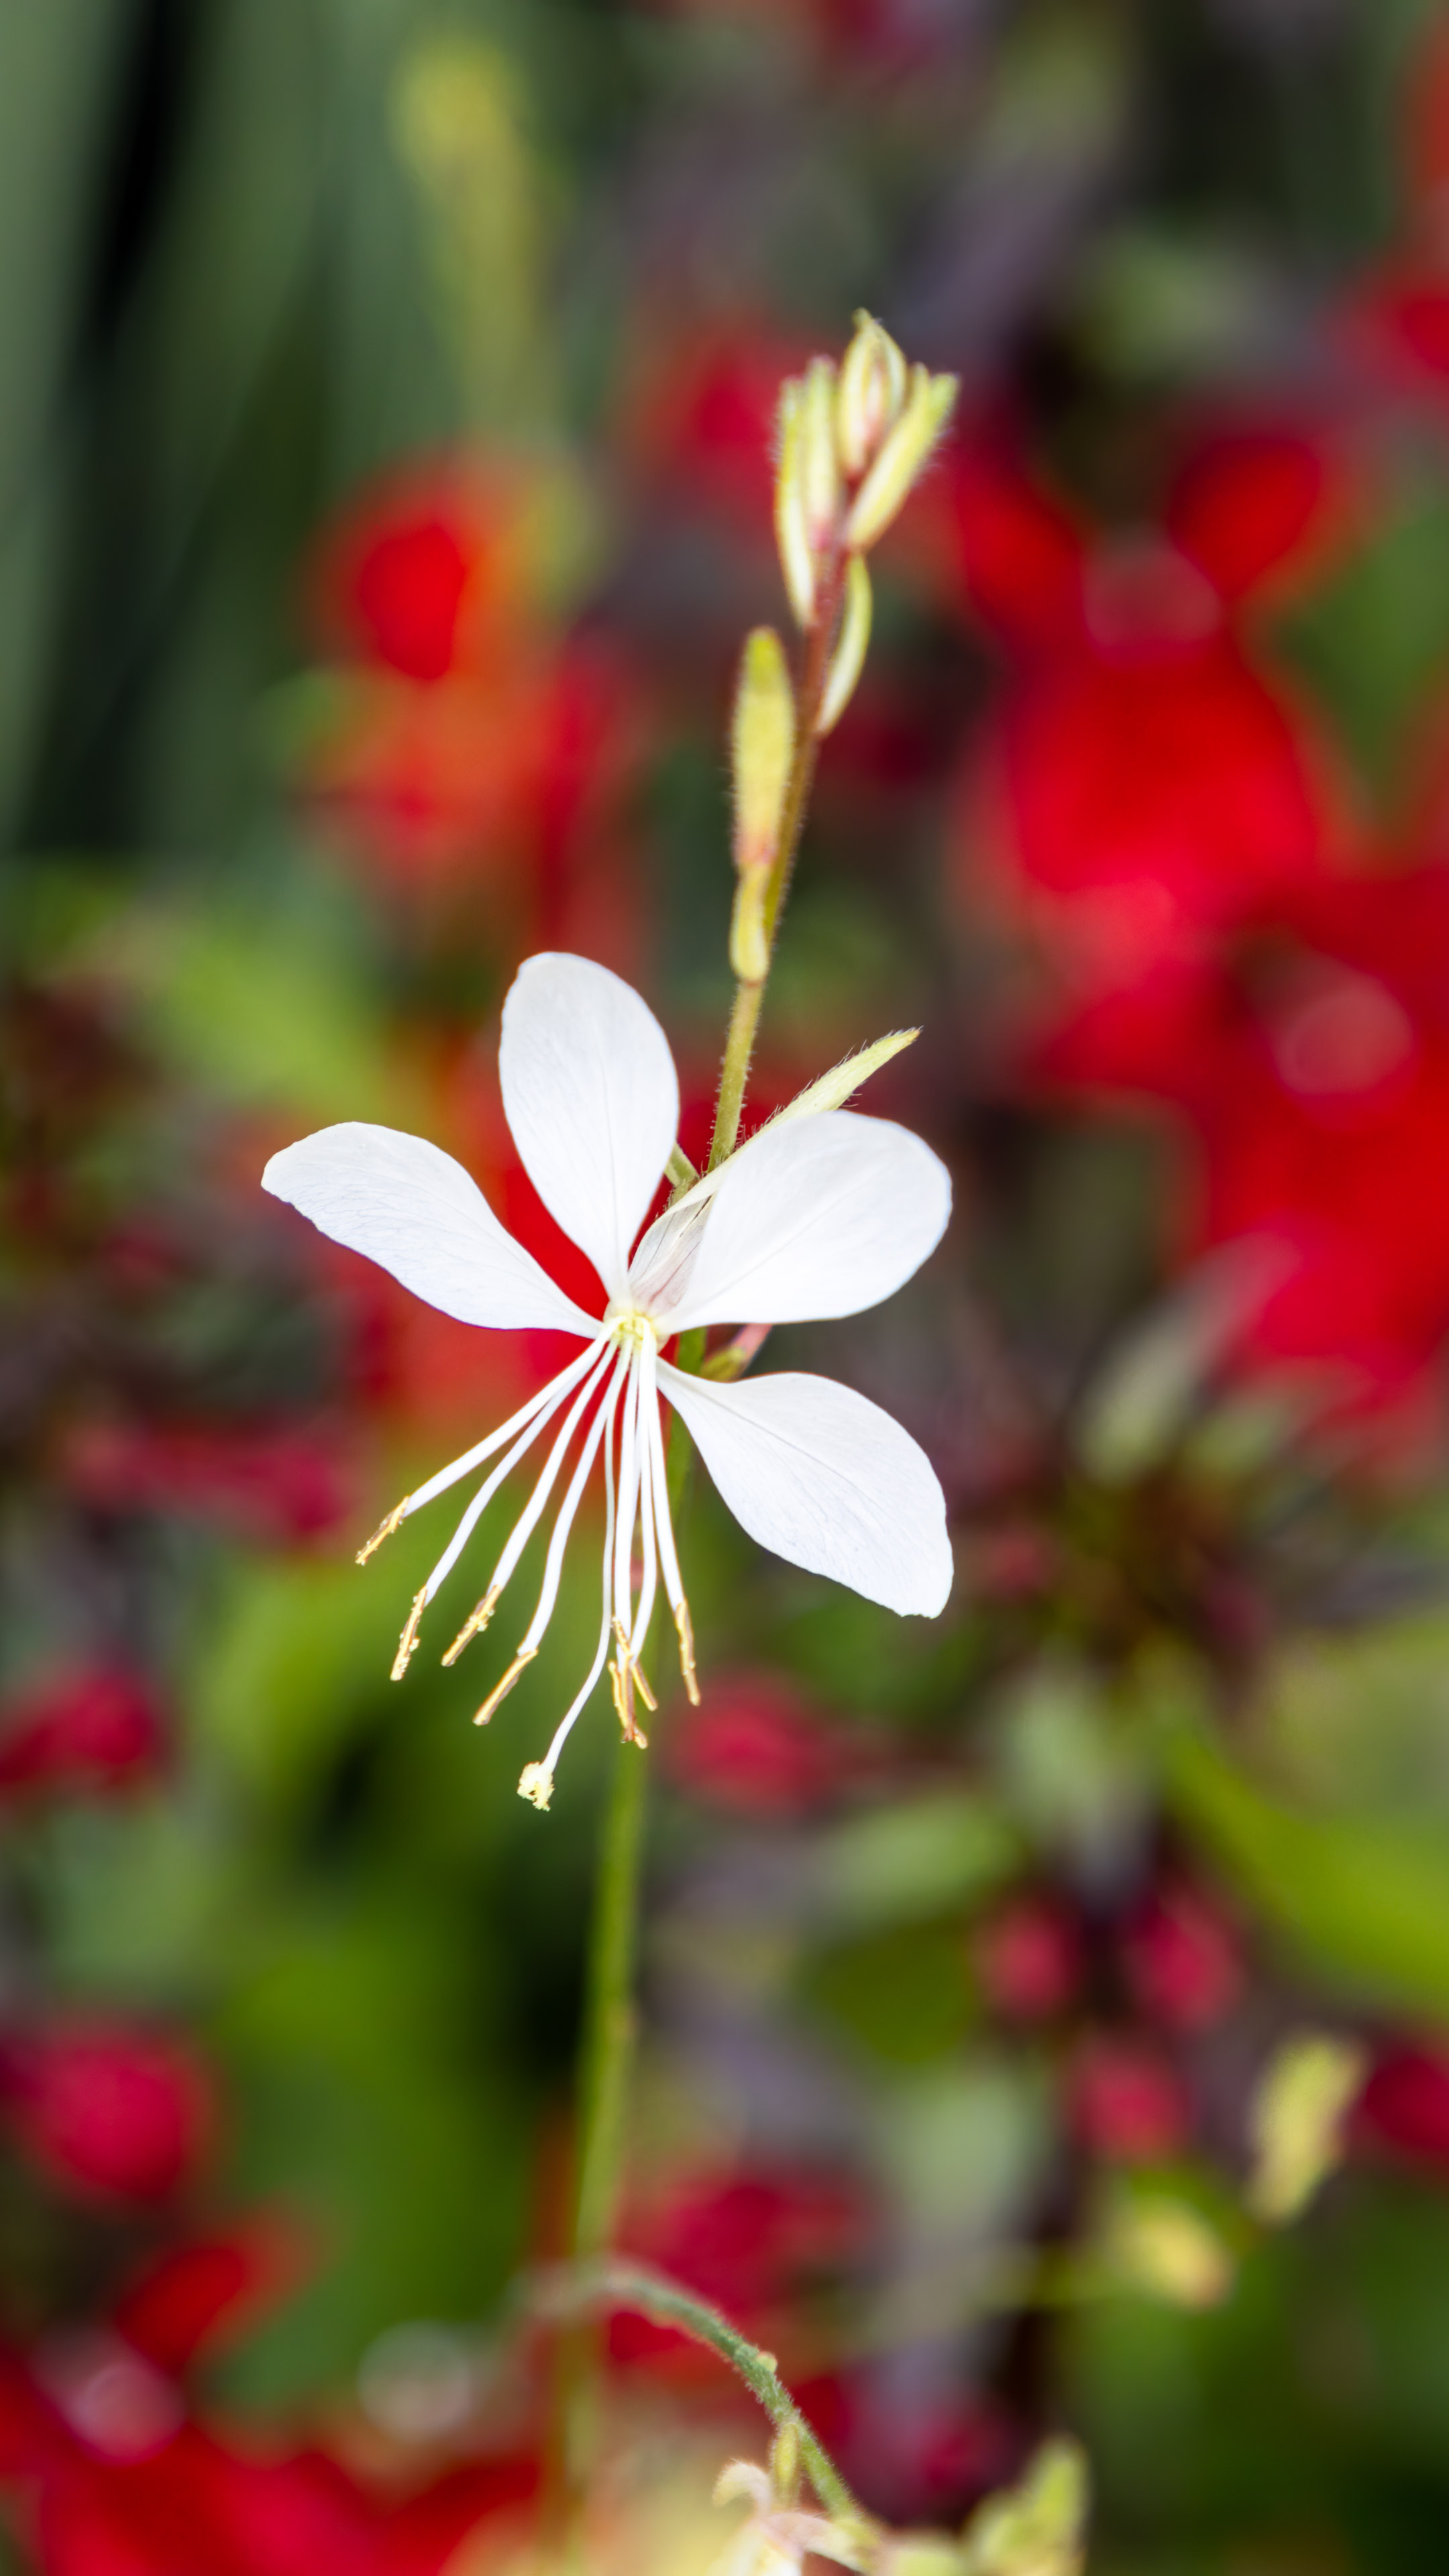 Capture the essence of nature's artistry on your phone screen with our white flower on red and green background phone wallpaper.